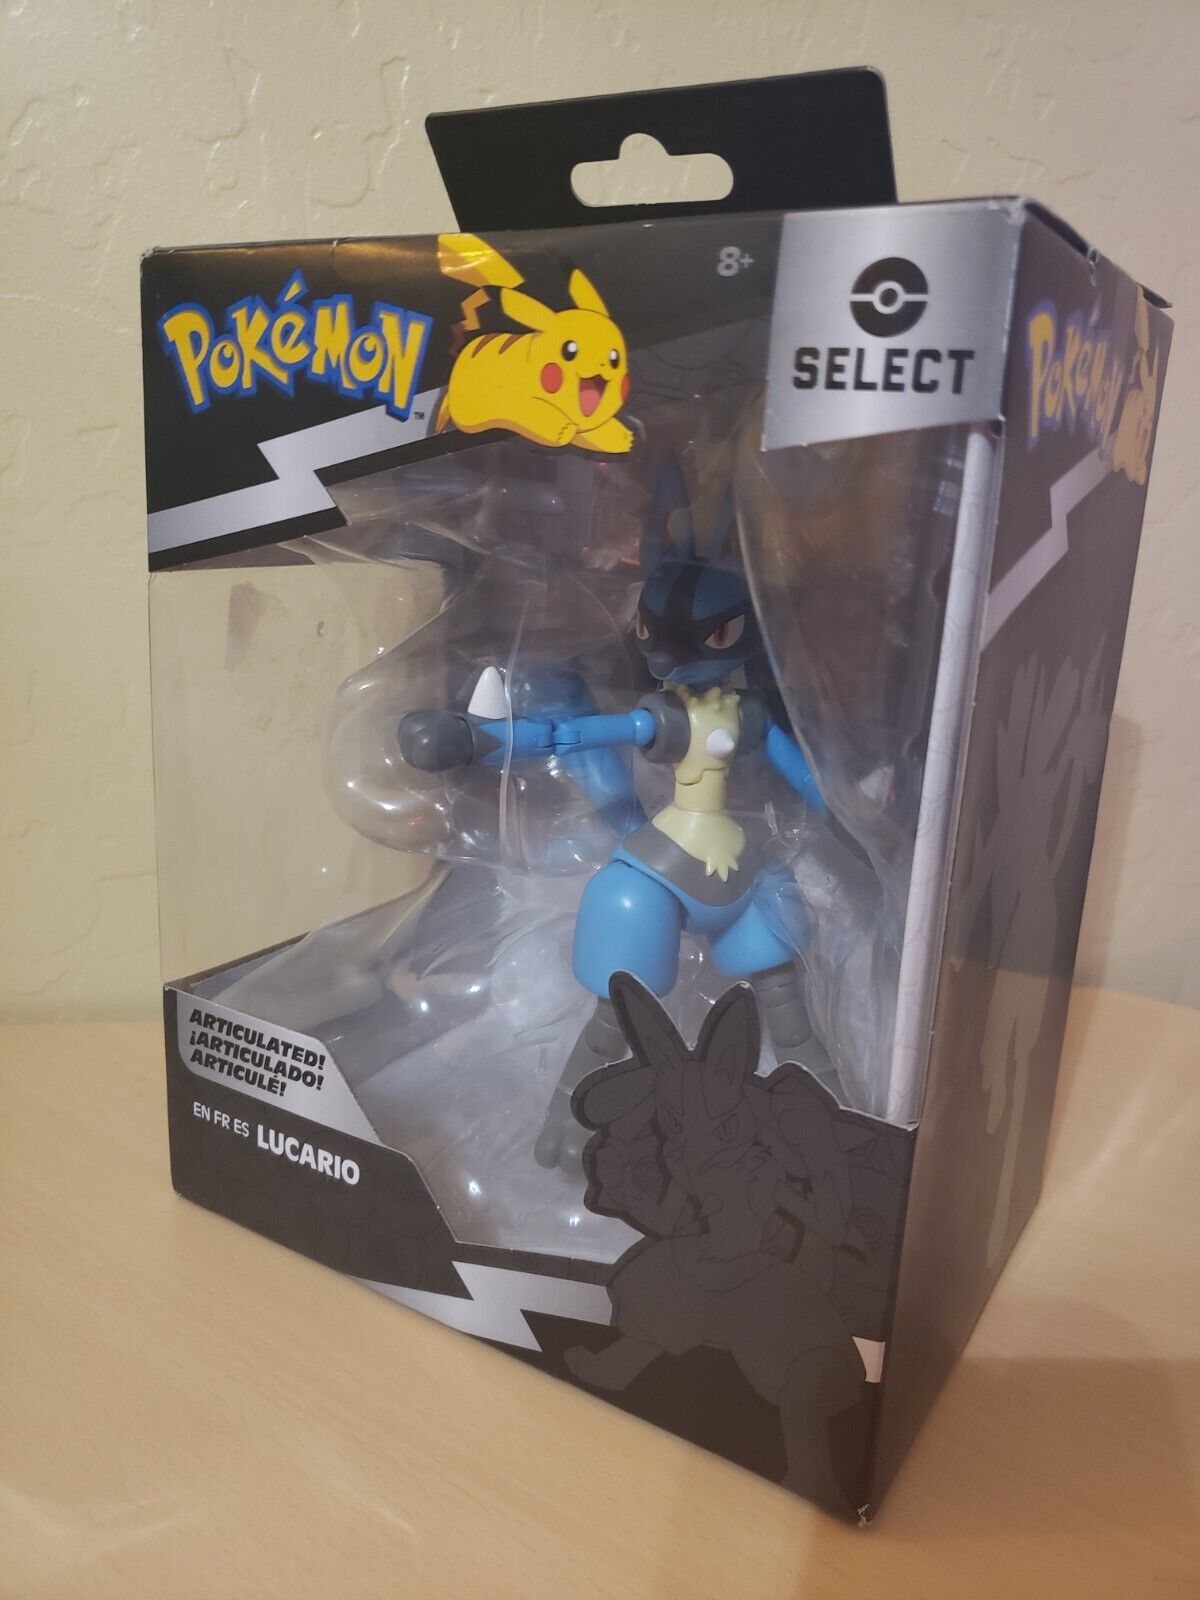 Pokemon Select Articulated Lucario 6"in Series 2 Action Figure *NEW OTHER*